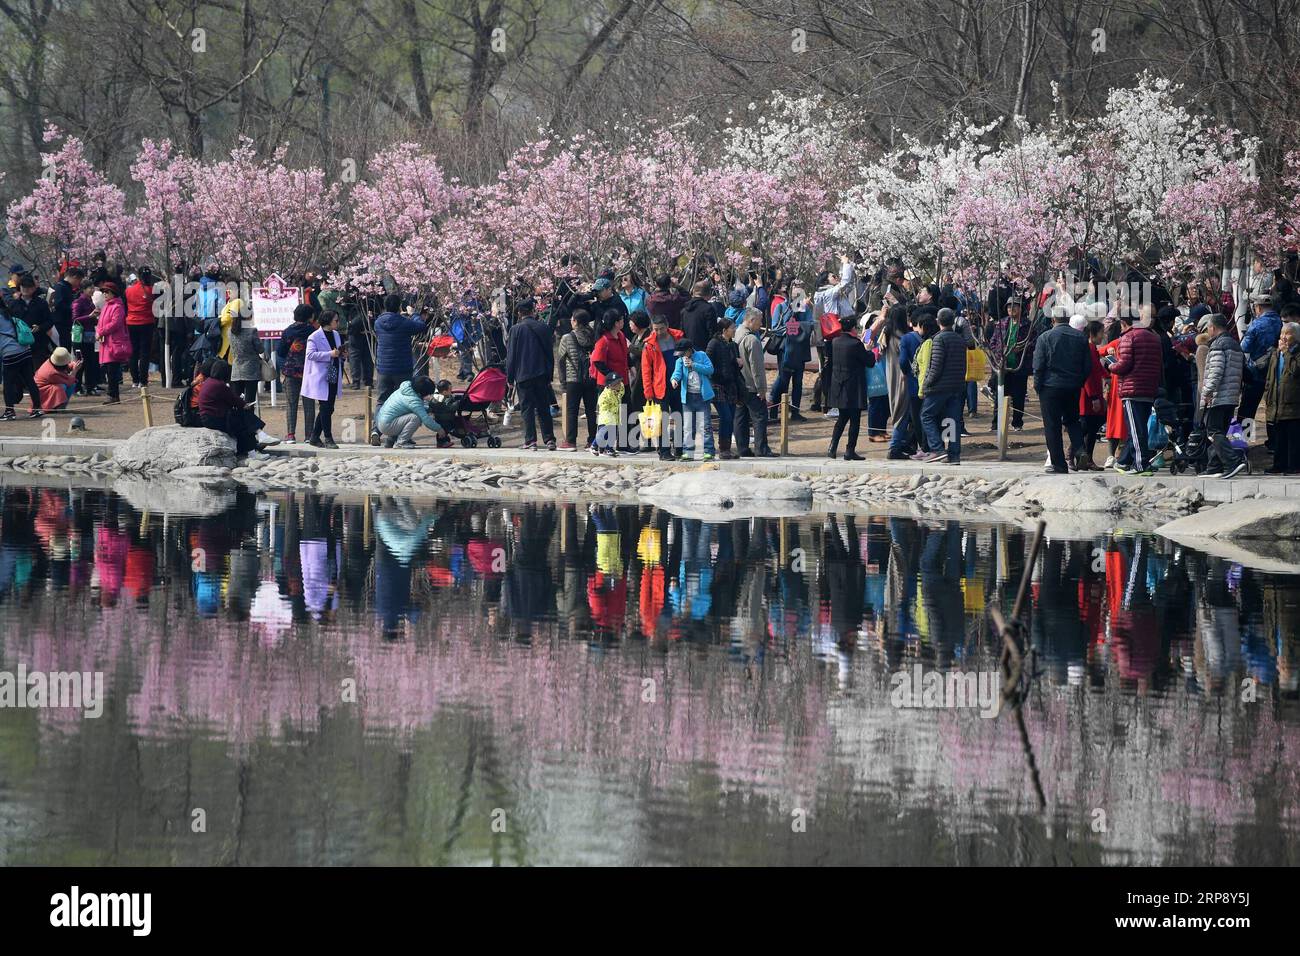 (190318) -- BEIJING, March 18, 2019 (Xinhua) -- Visitors enjoy the cherry blossoms at the Yuyuantan Park in Beijing, capital of China, March 18, 2019. The 31st cherry blossom cultural festival will kick off on Tuesday and the visitors can enjoy a total of 3,000 cherry trees here. (Xinua/Li Jundong) CHINA-BEIJING-YUYUANTAN PARK-CHERRY BLOSSOM (CN) PUBLICATIONxNOTxINxCHN Stock Photo